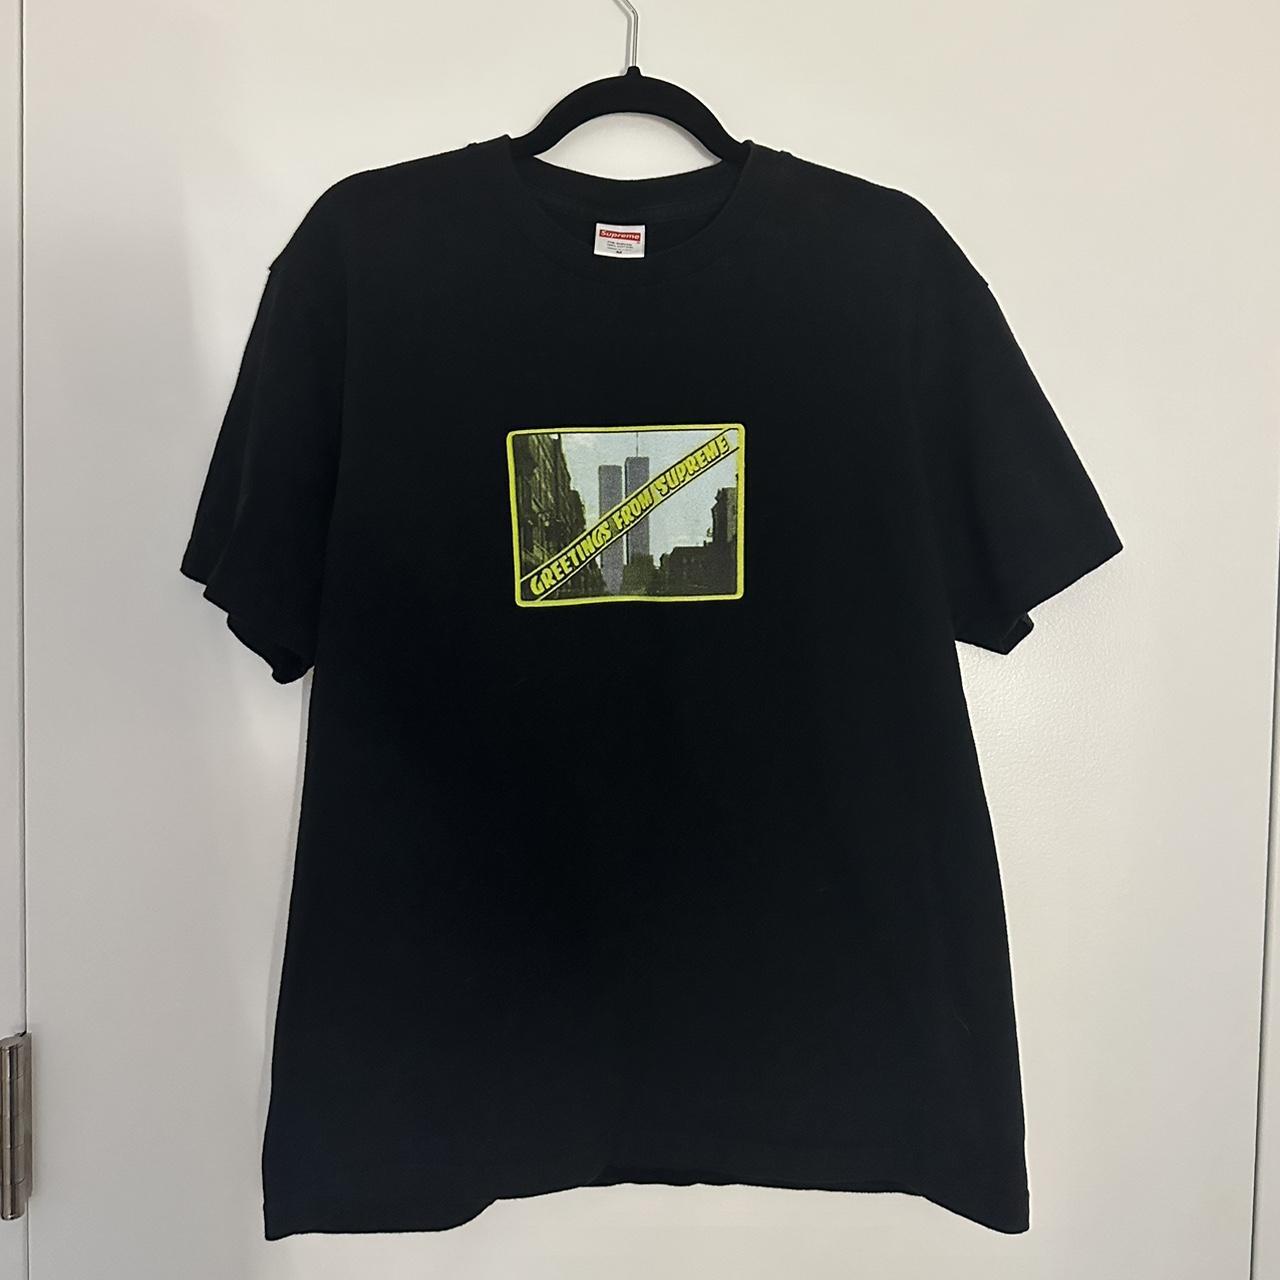 Greetings From Supreme Black Tee 🗽 SS19 Size M... - Depop